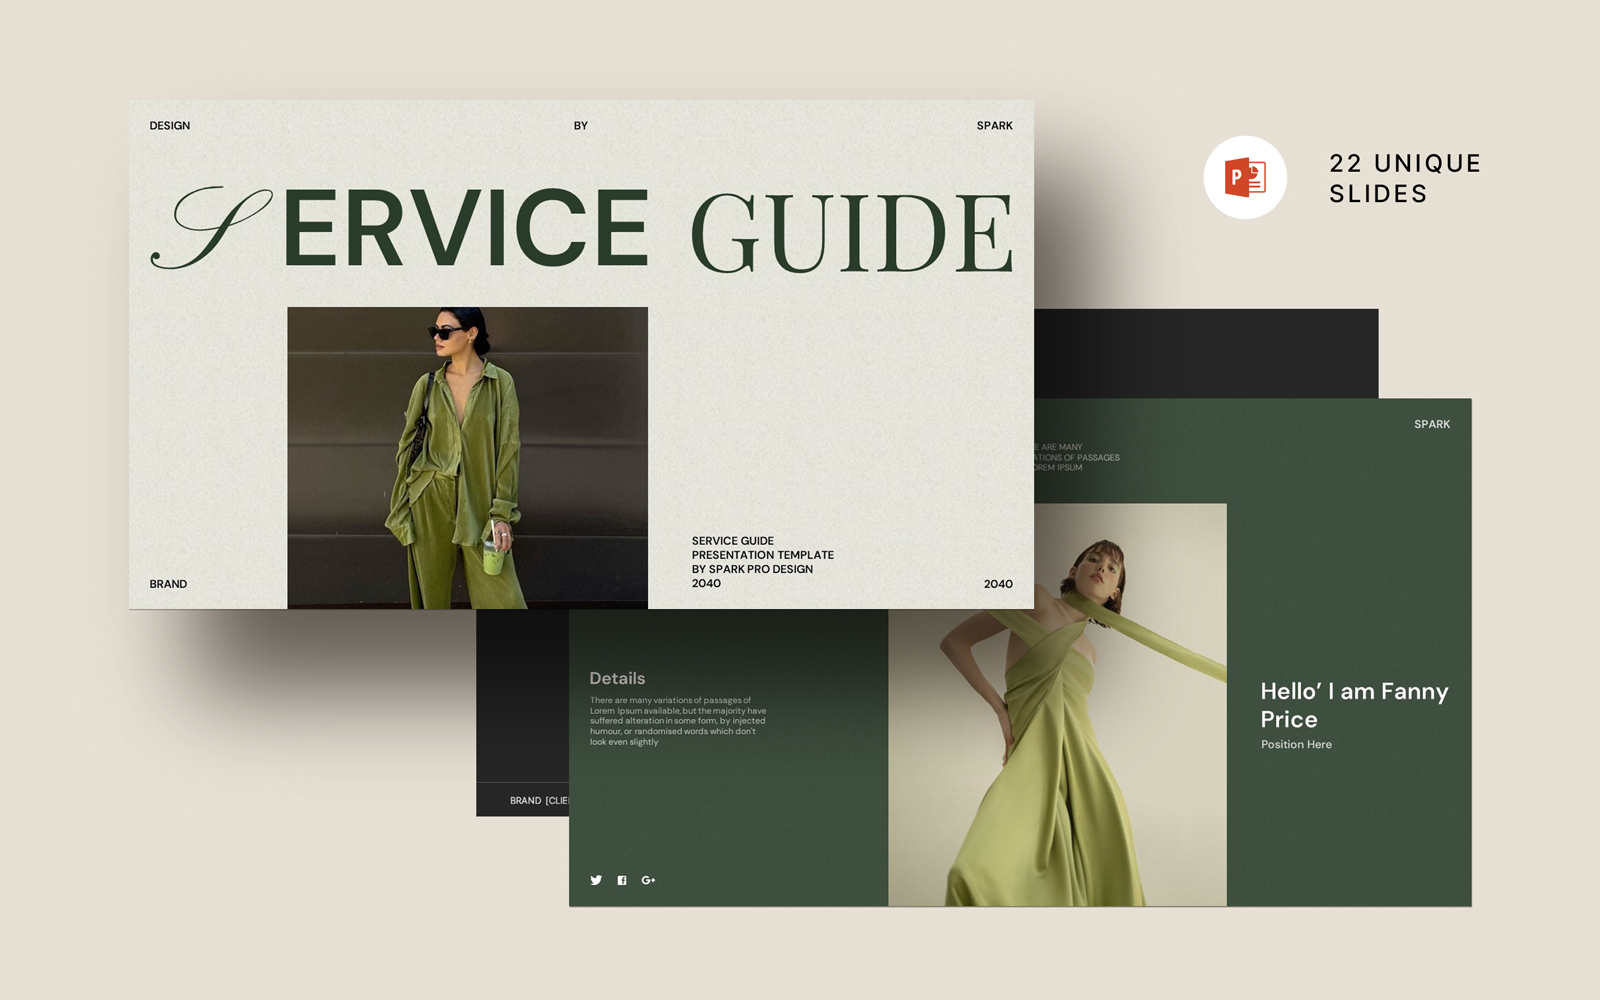 Service Guide PowerPoint Template